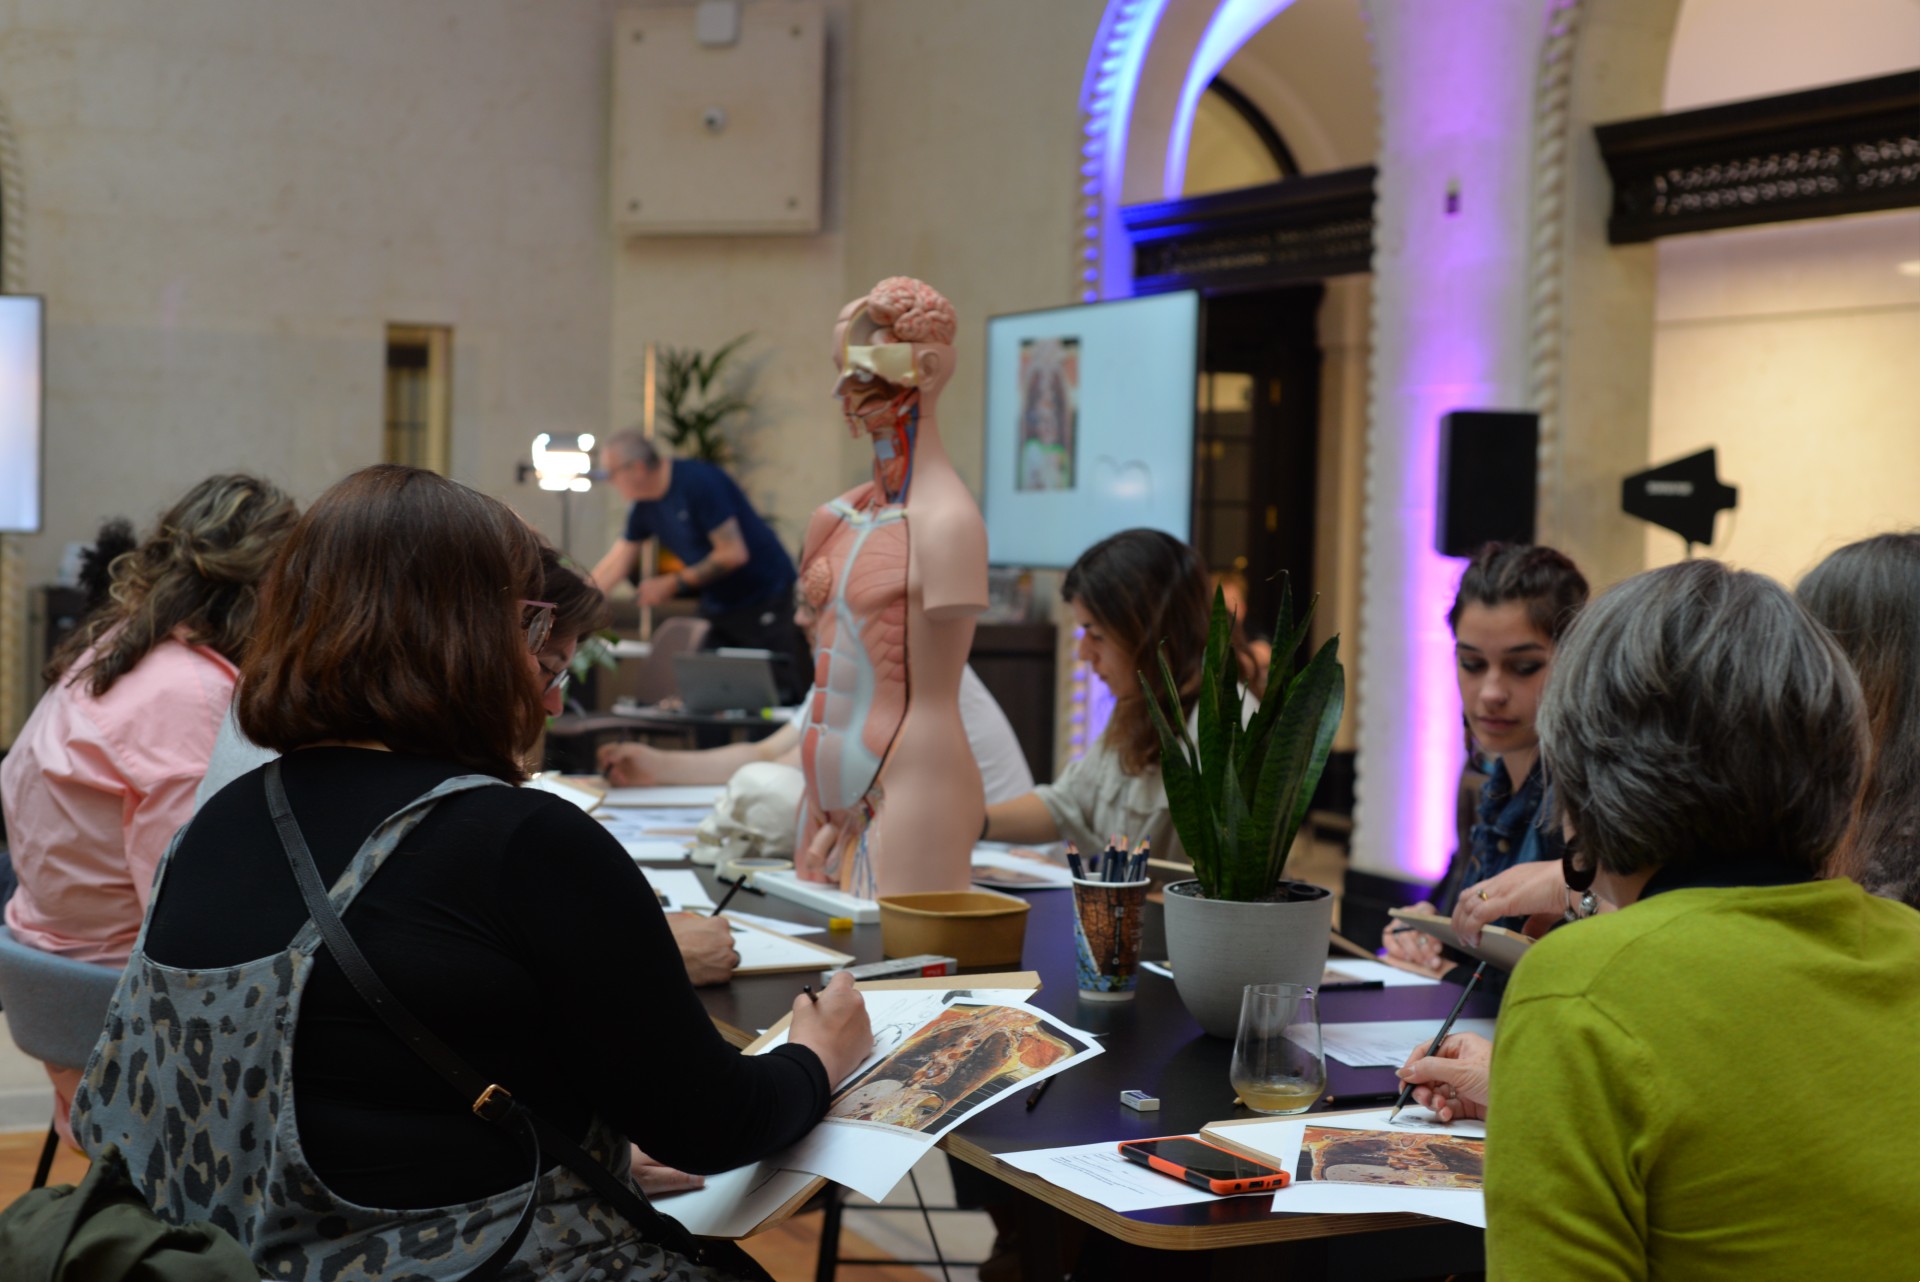 Community group taking part in anatomy drawing workshop